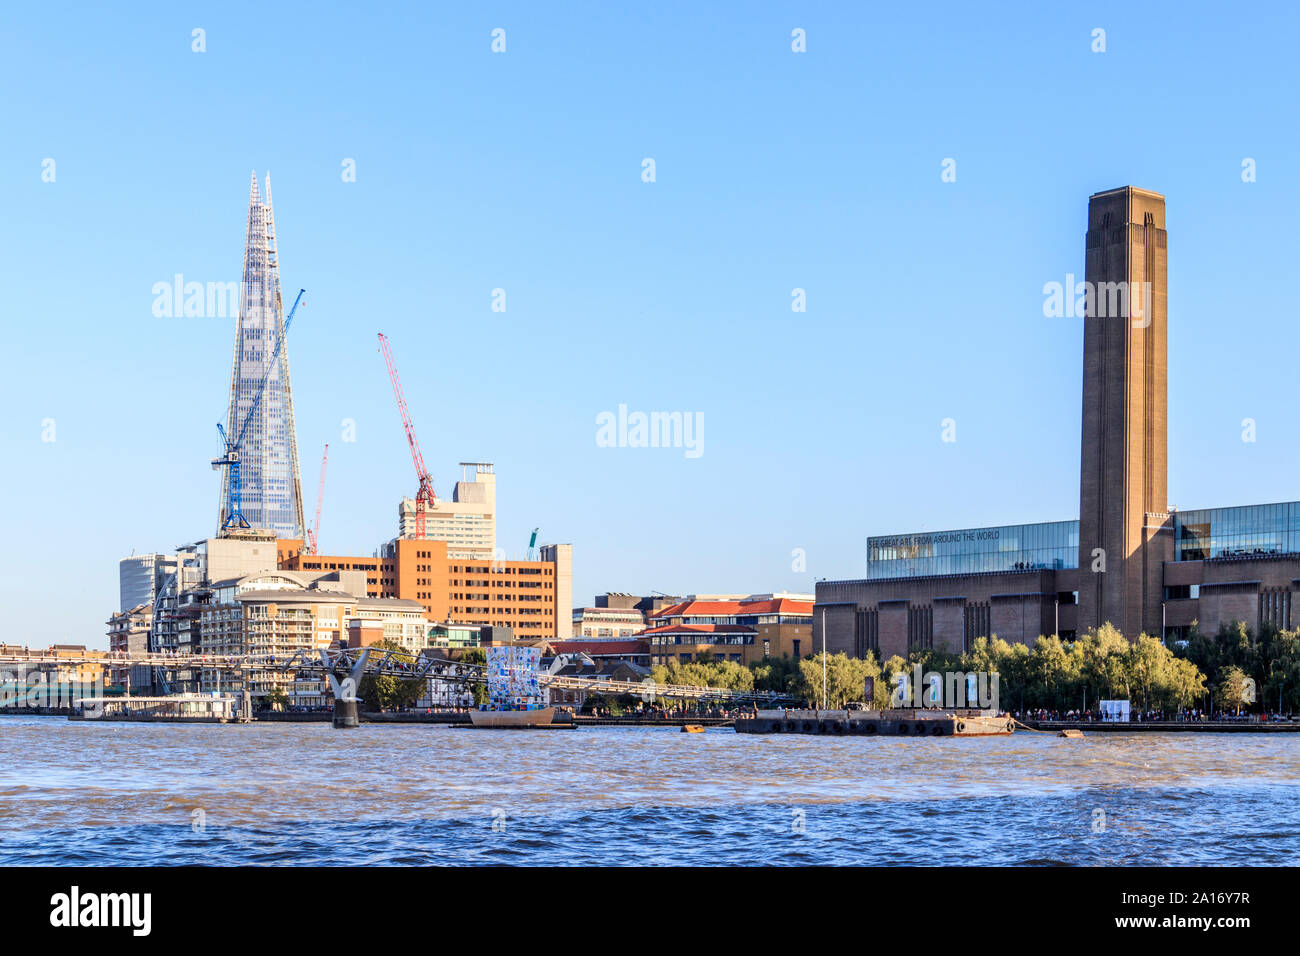 The Shard of Glass, Millennium Bridge and Tate Modern art Gallery from across the River Thames, London, UK Stock Photo